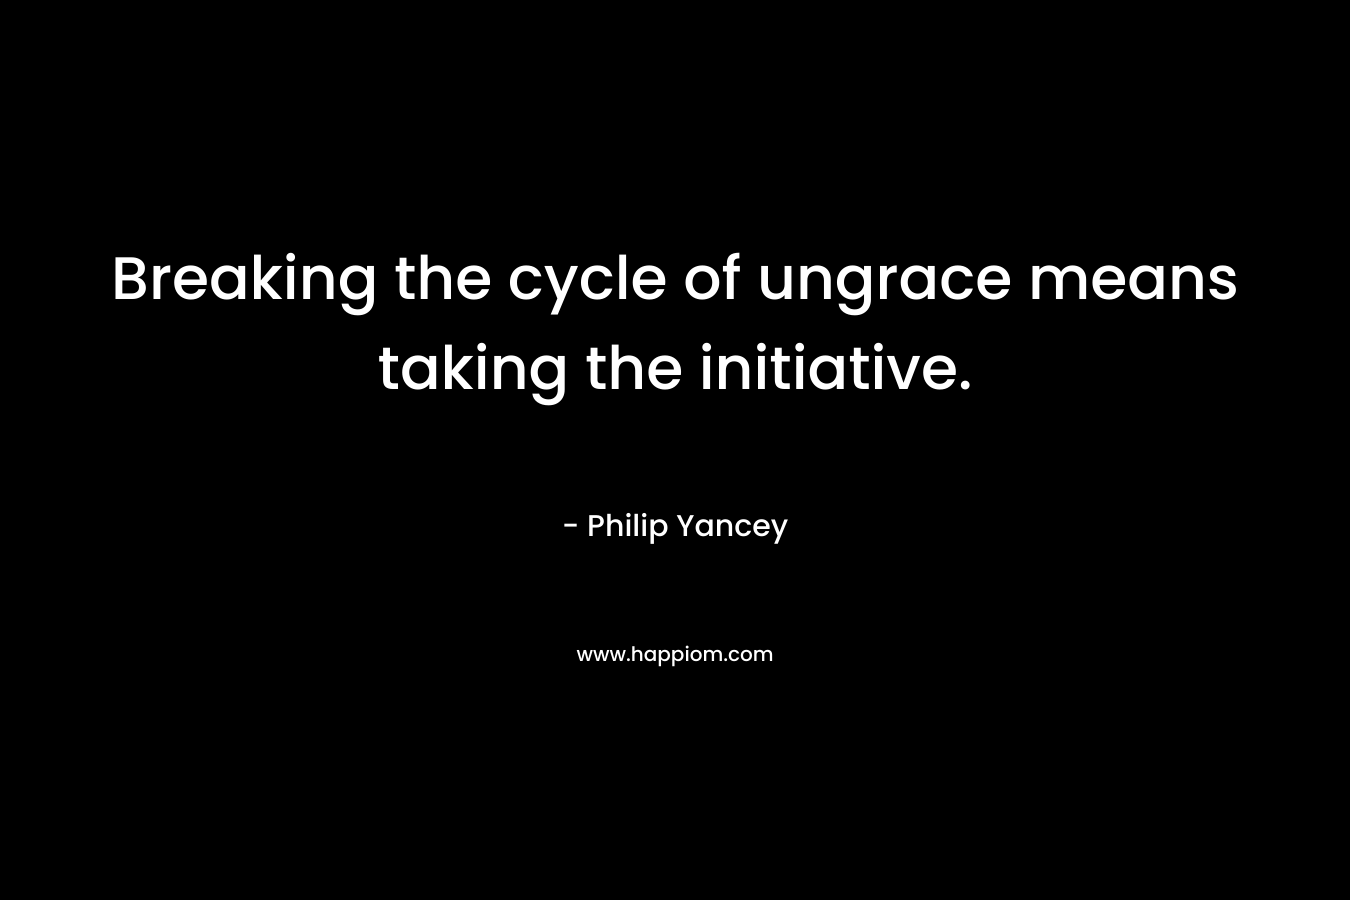 Breaking the cycle of ungrace means taking the initiative. – Philip Yancey